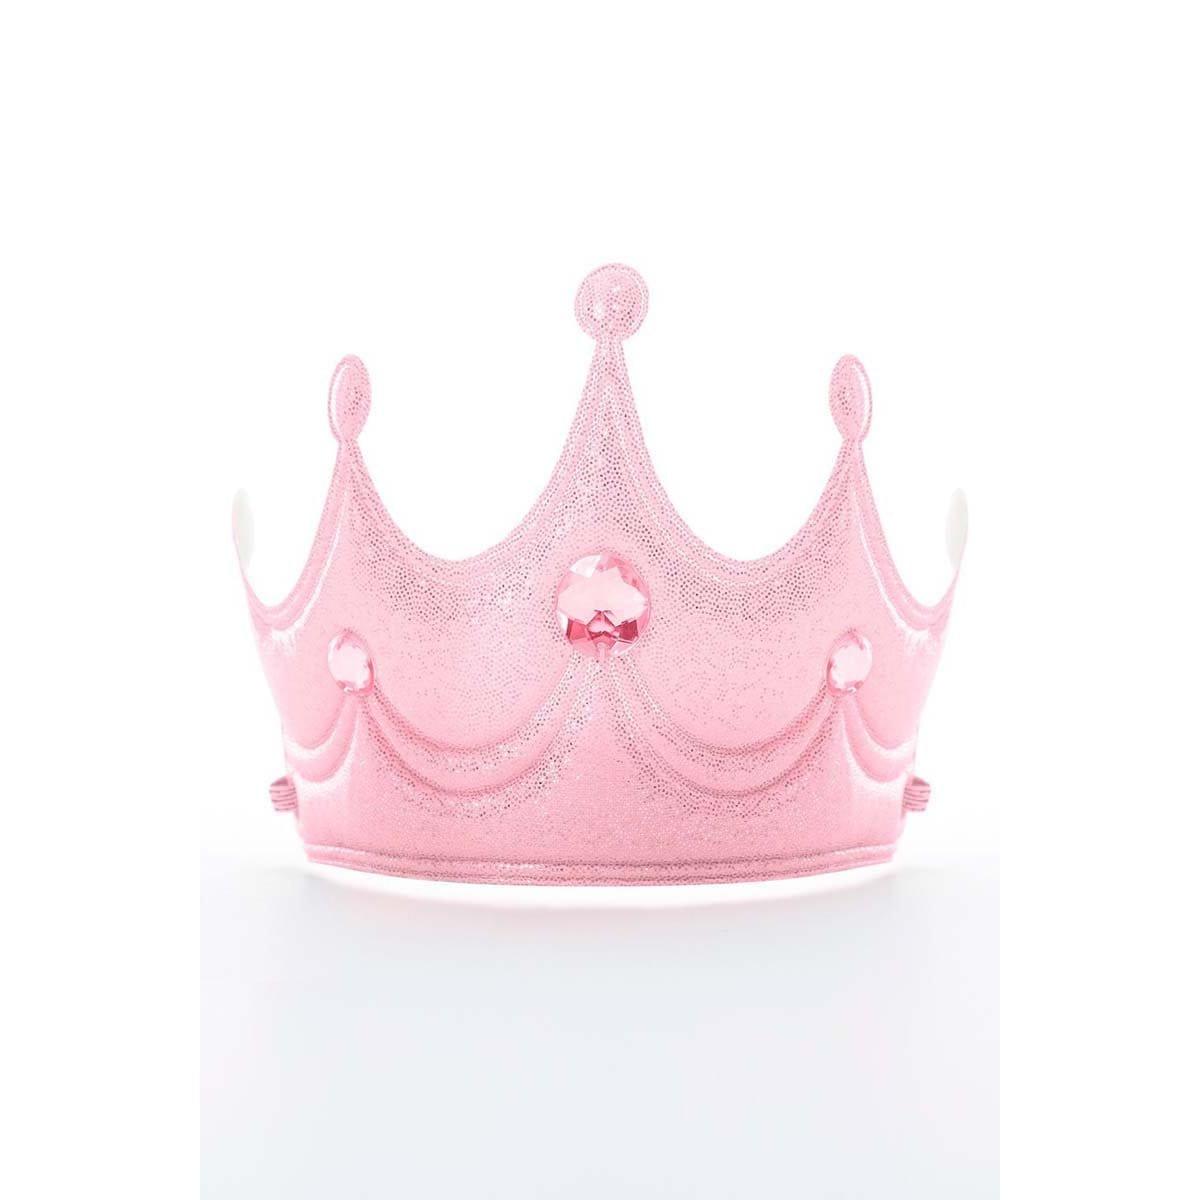 Buy Costume Accessories Pink princess soft crown for girls sold at Party Expert